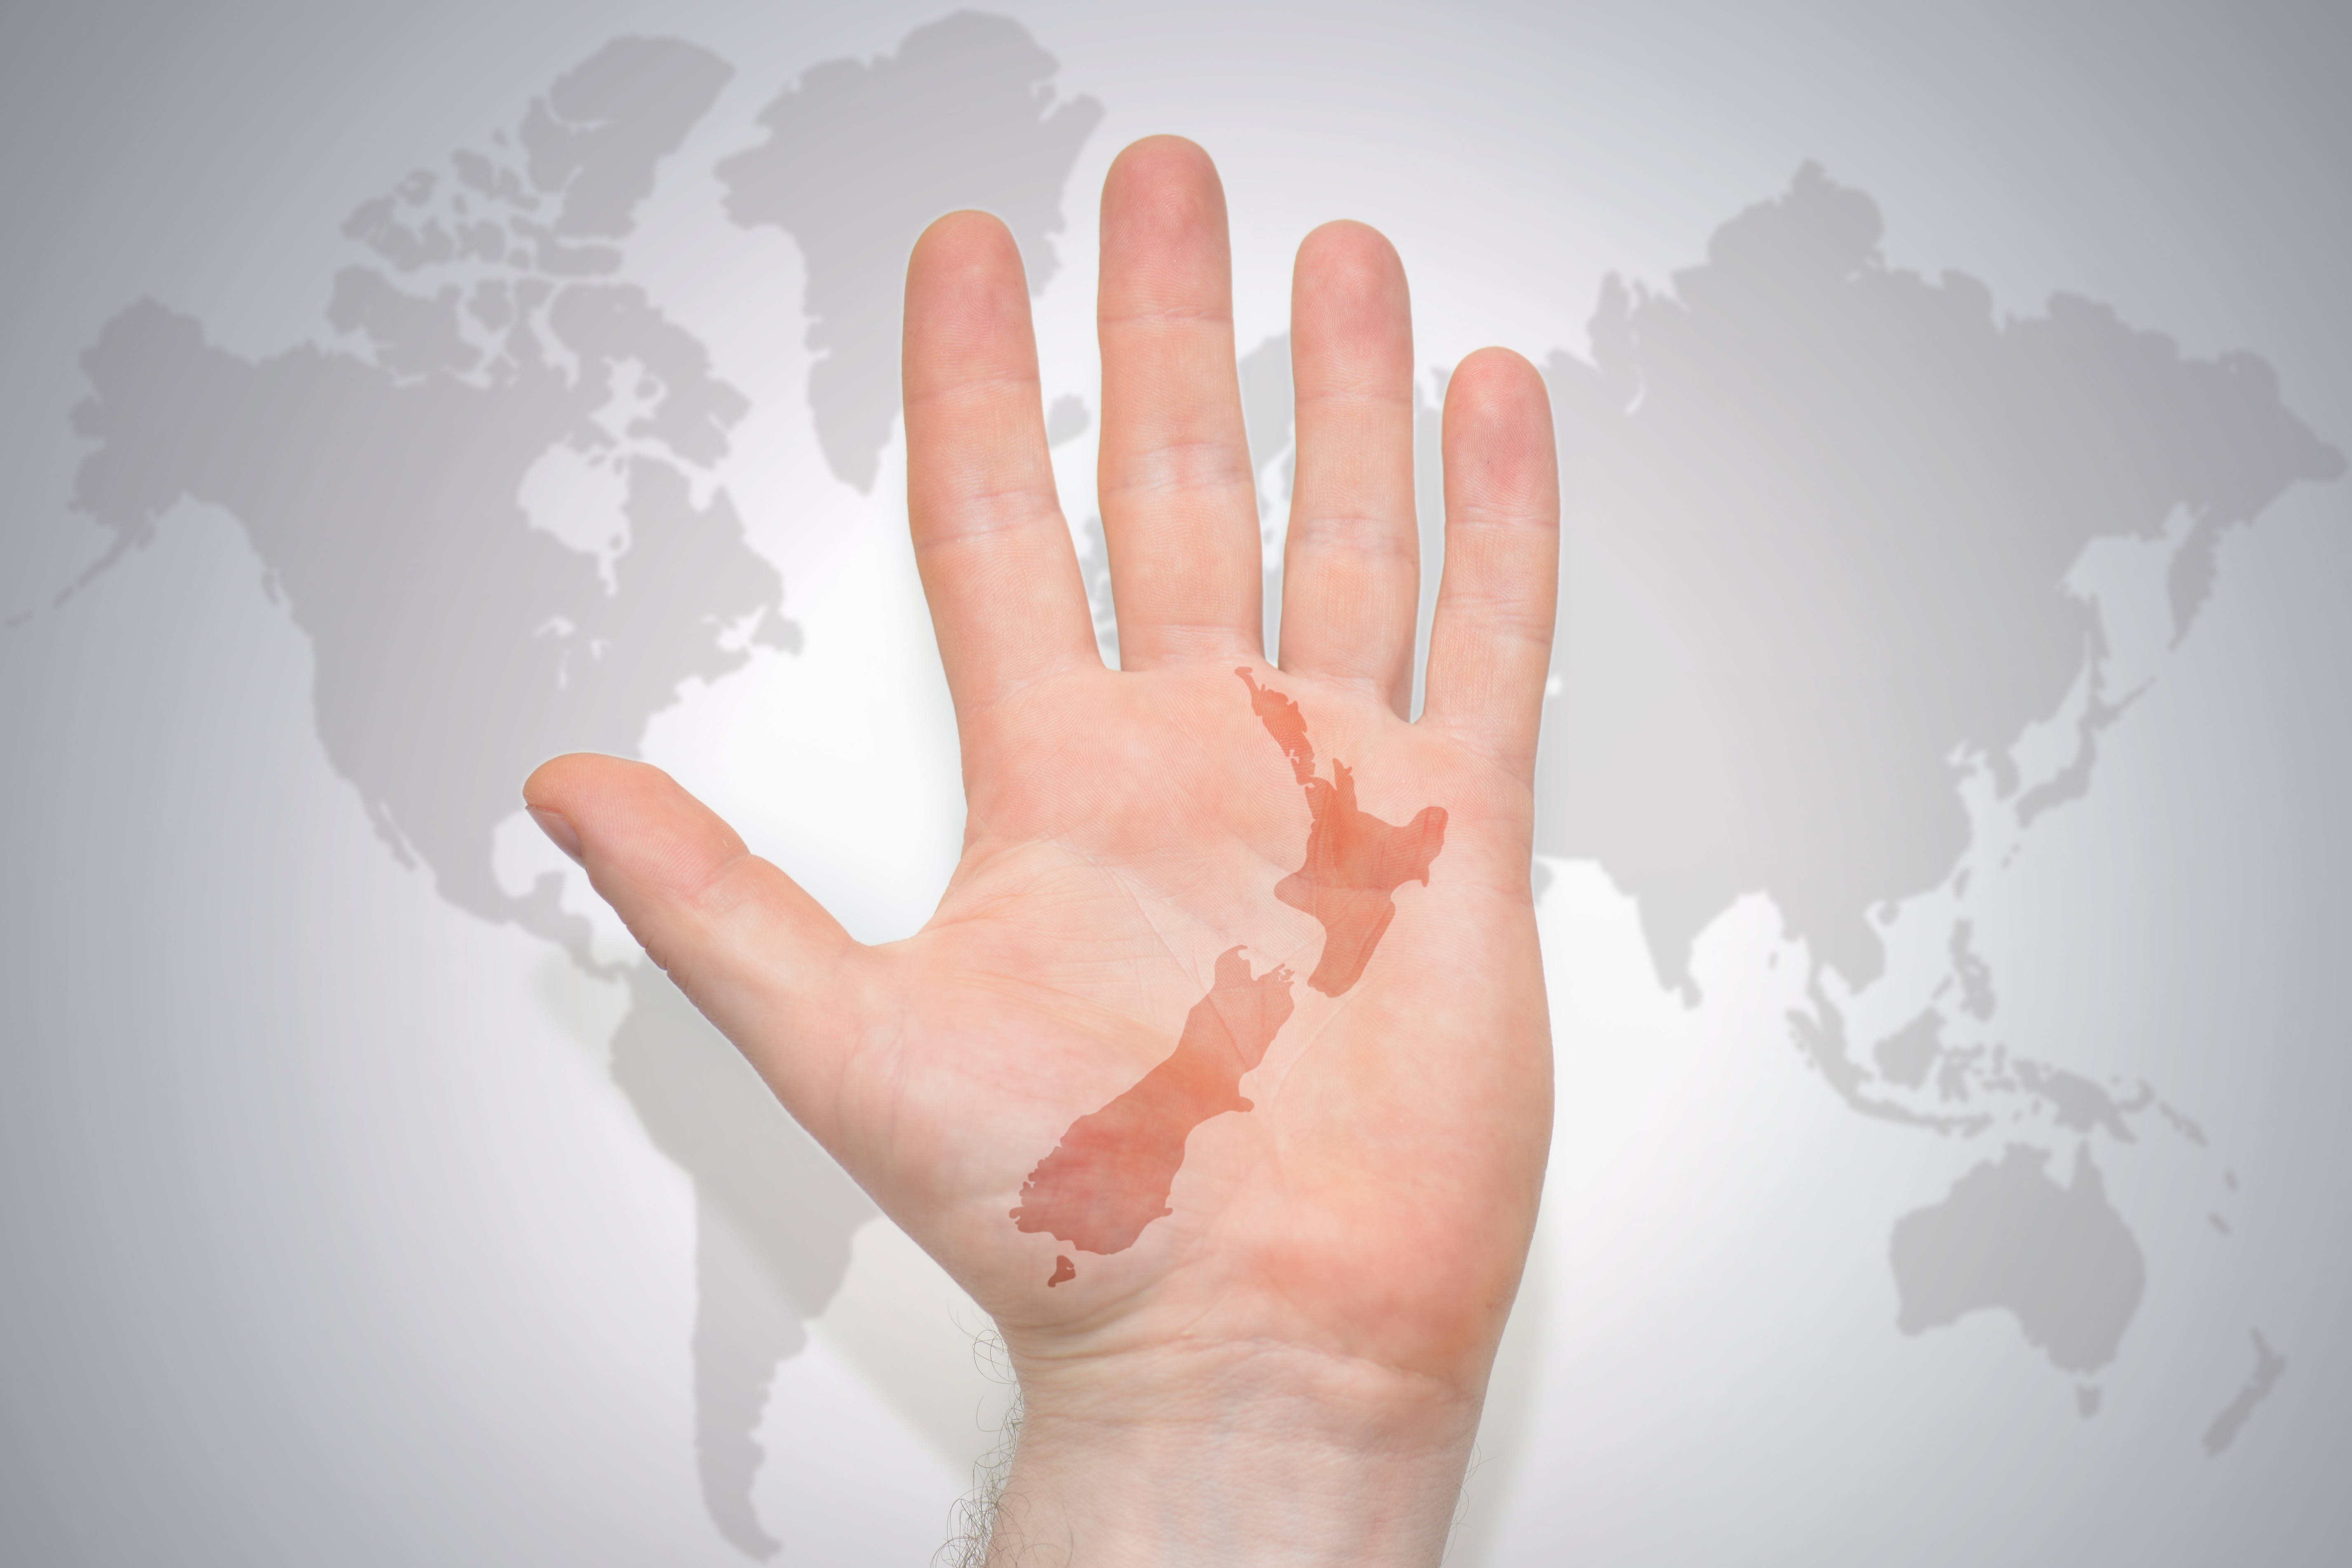 Hand with an outline of New Zealand against a grey background of a world map